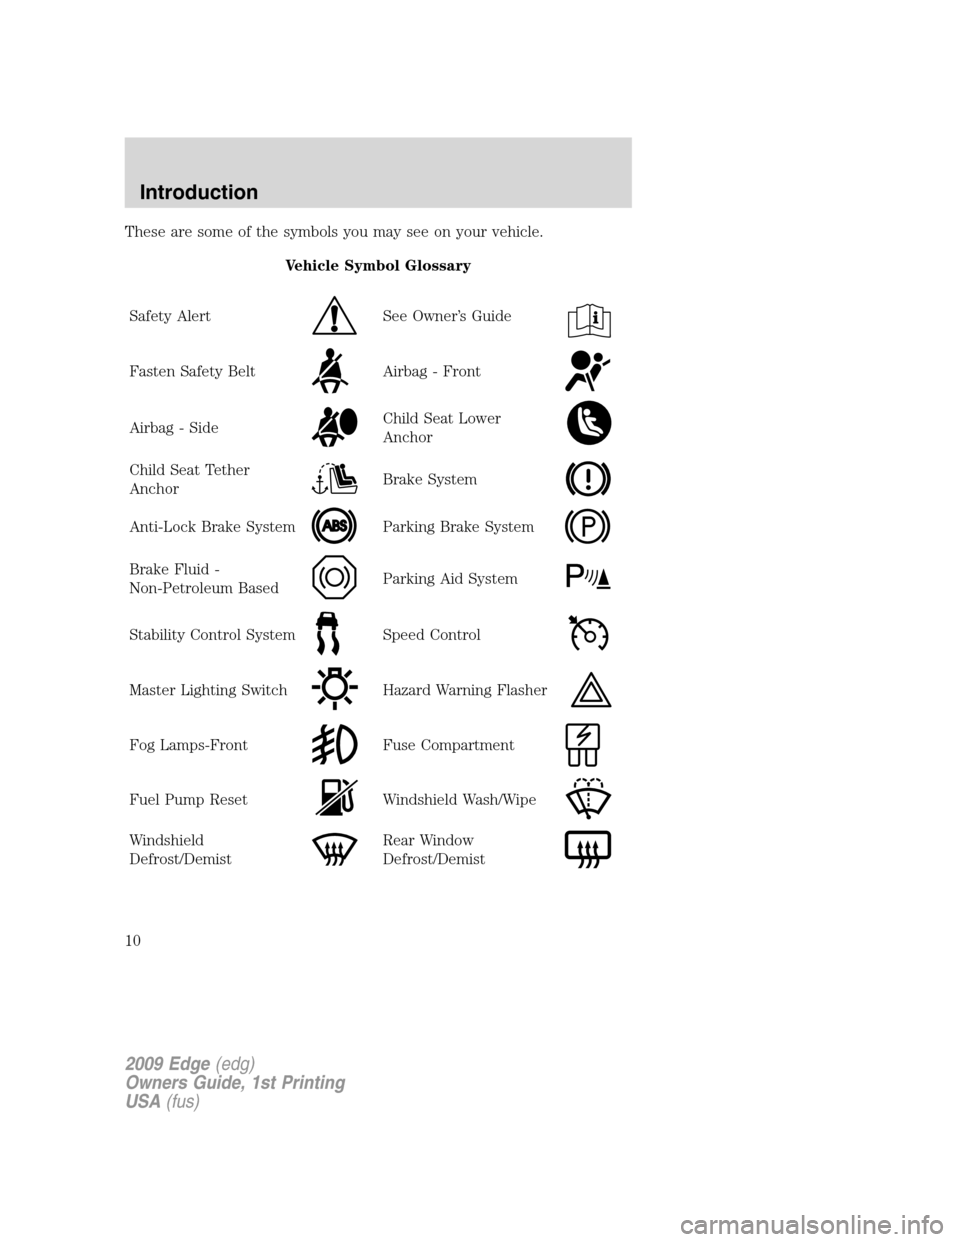 FORD EDGE 2009 1.G Owners Manual These are some of the symbols you may see on your vehicle.
Vehicle Symbol Glossary
Safety Alert
See Owner’s Guide
Fasten Safety BeltAirbag - Front
Airbag - SideChild Seat Lower
Anchor
Child Seat Tet